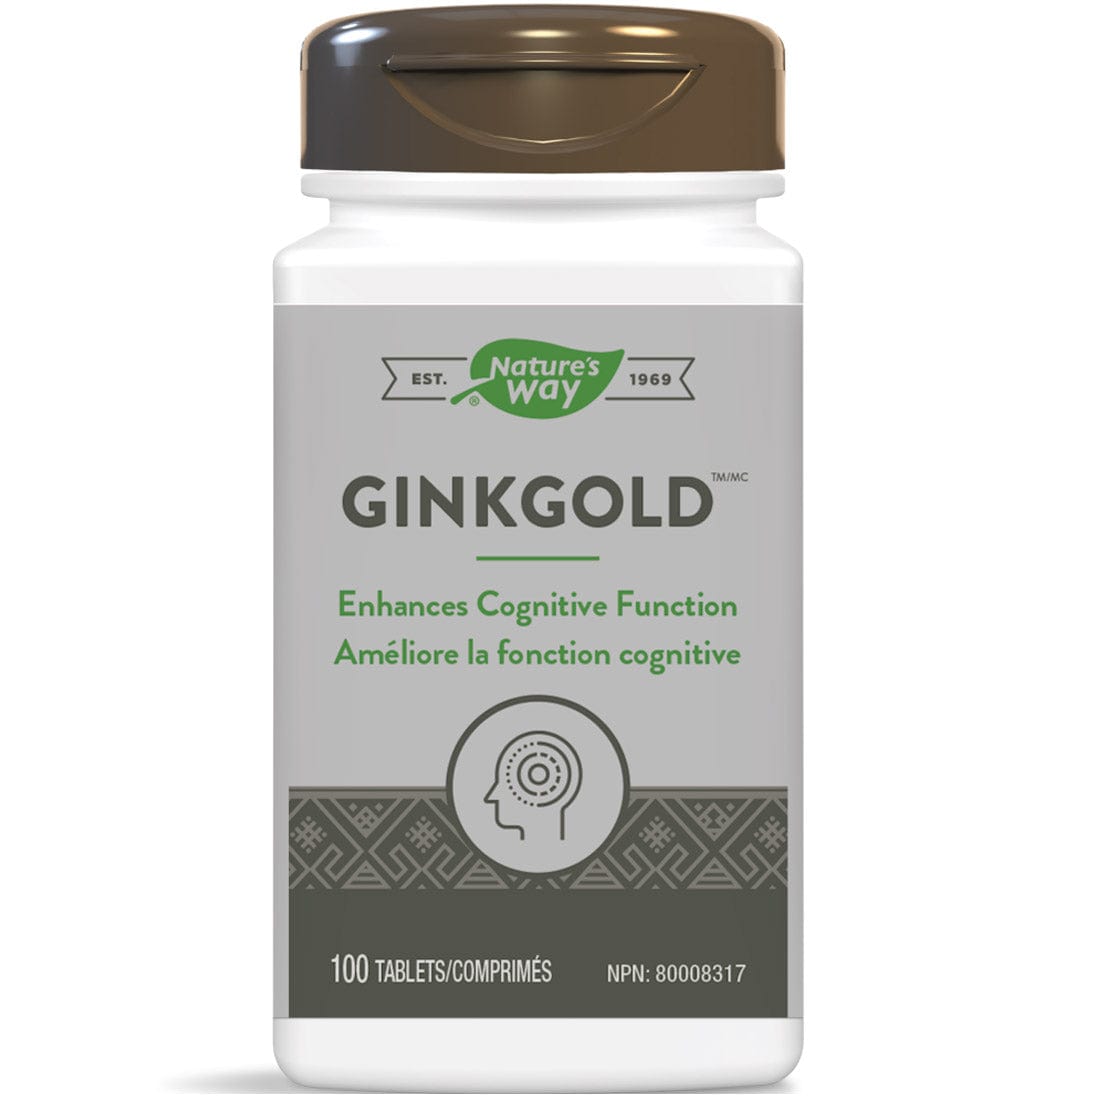 Nature's Way Ginkgold 60mg (For Improved Mental Sharpness), 100 Tablets